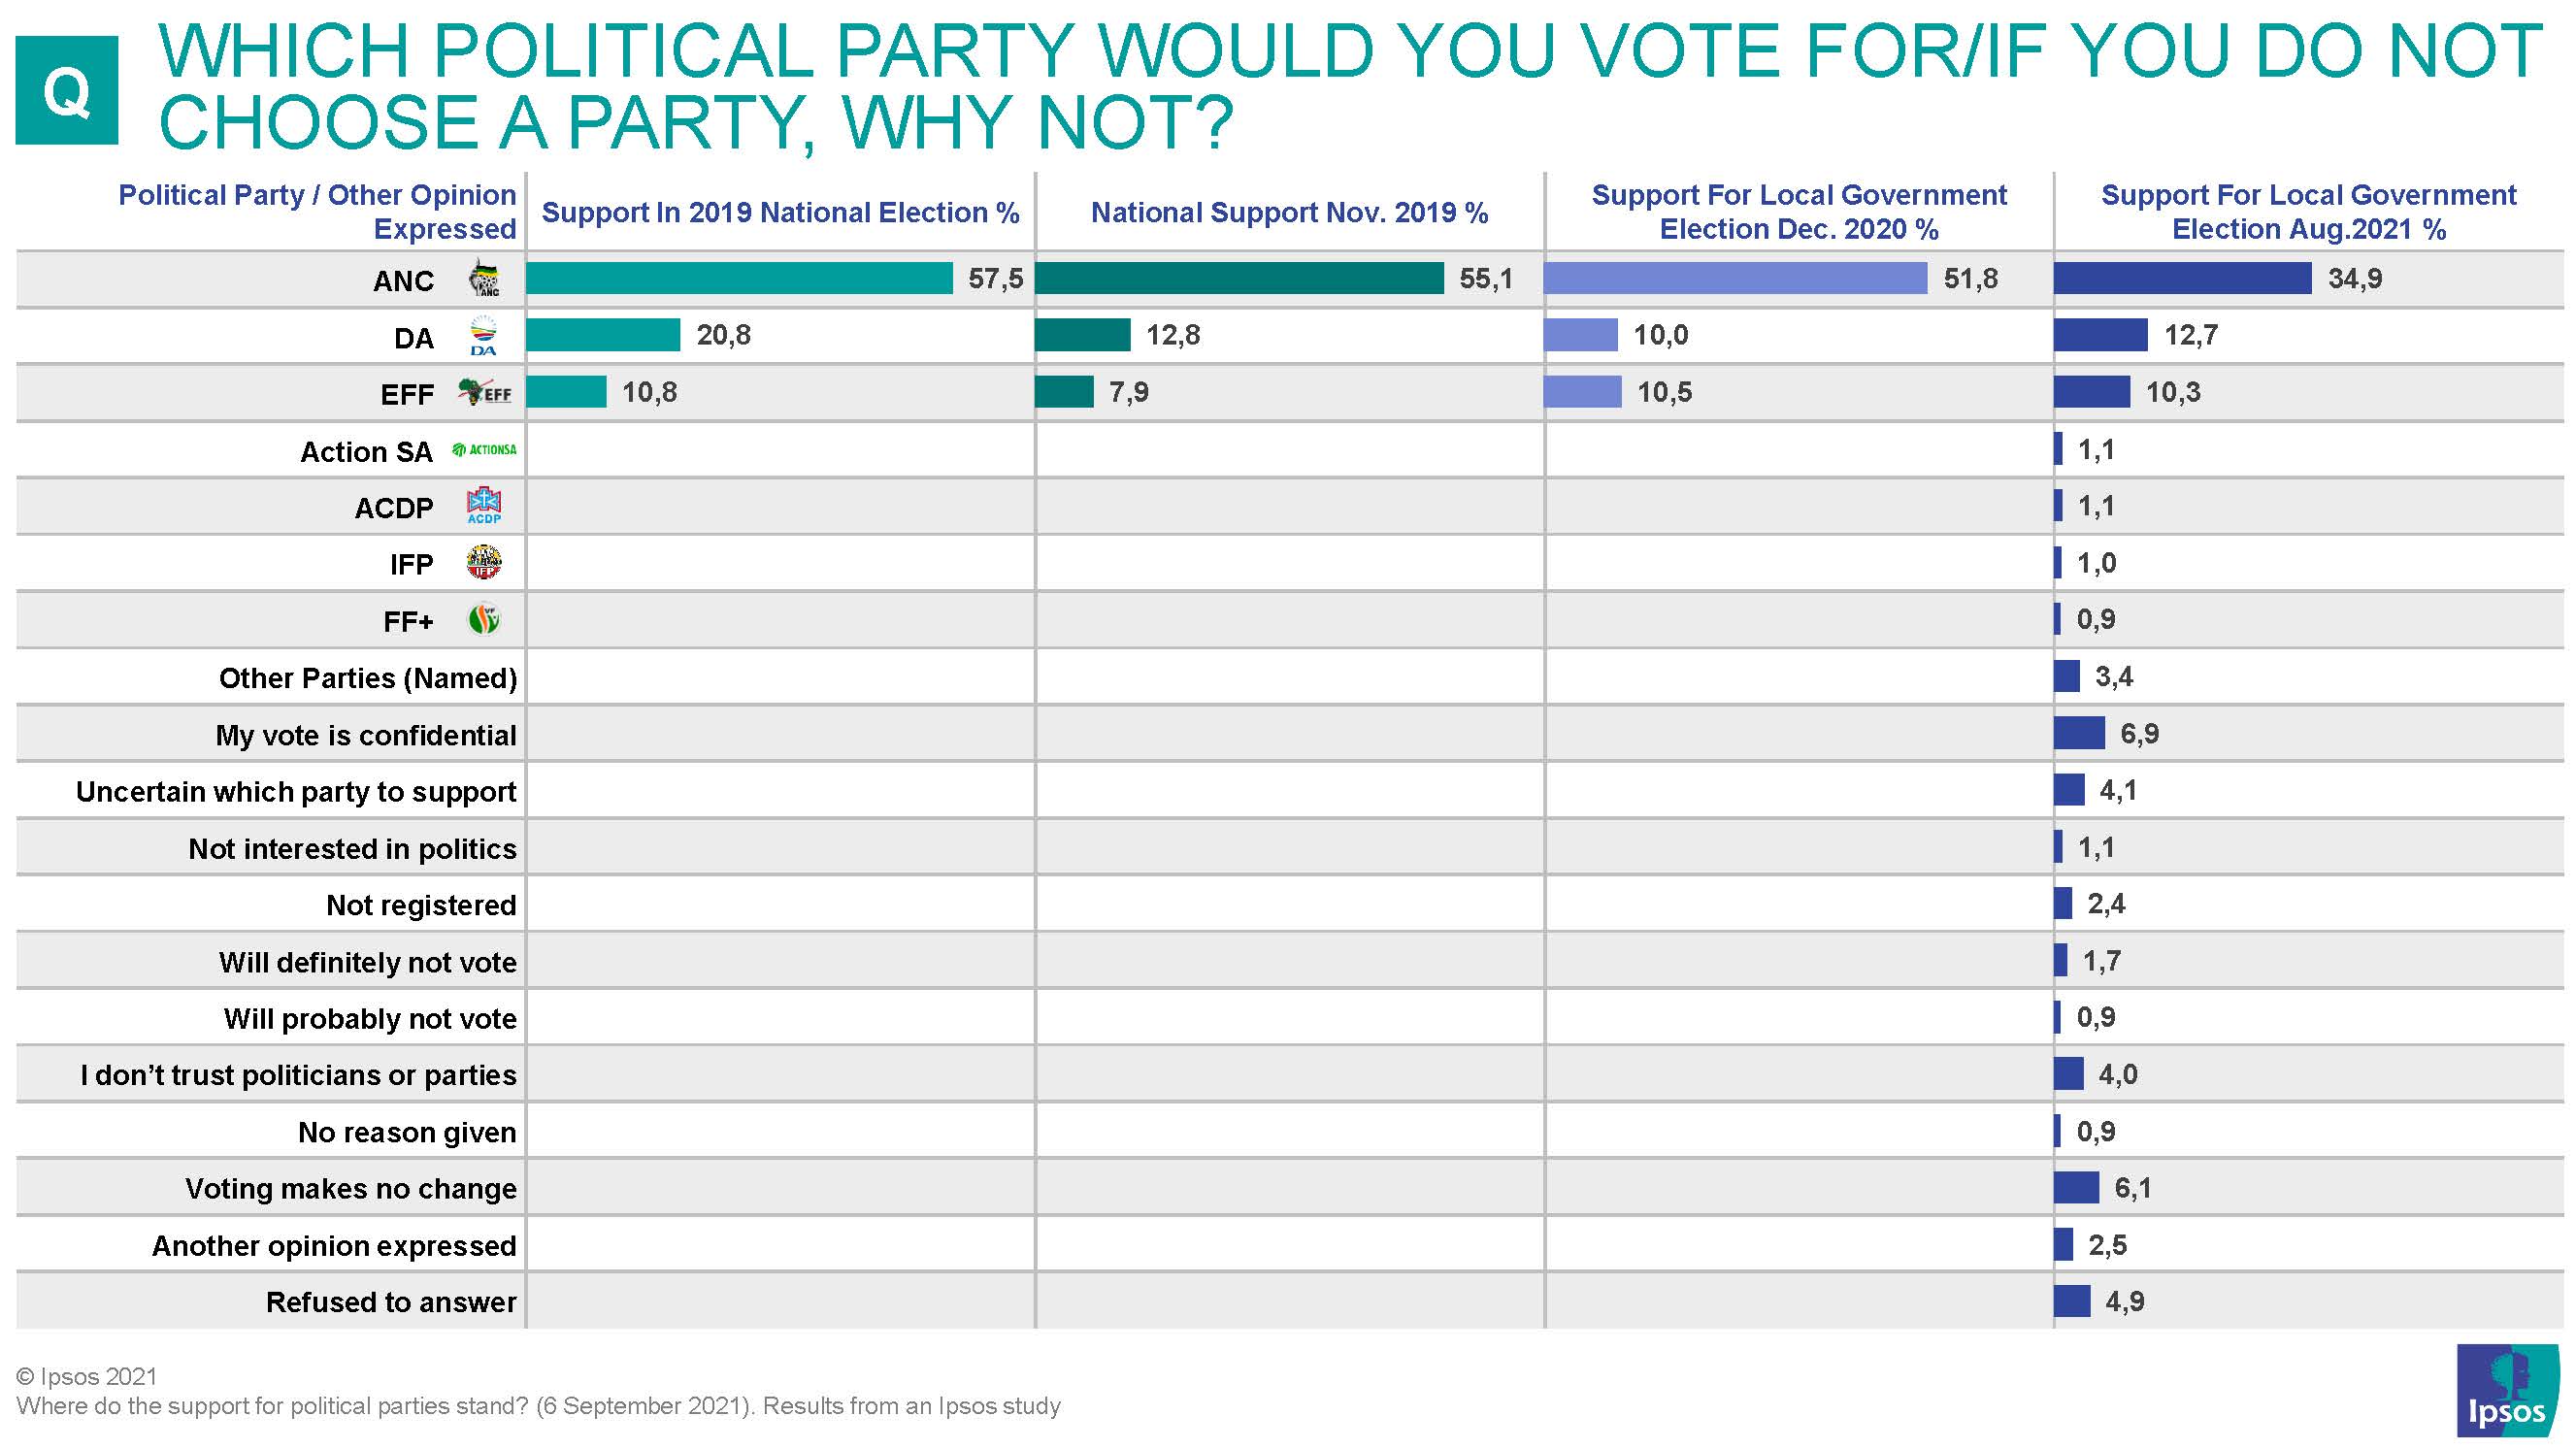 which political party would you vote for if you do not choose a party, why not